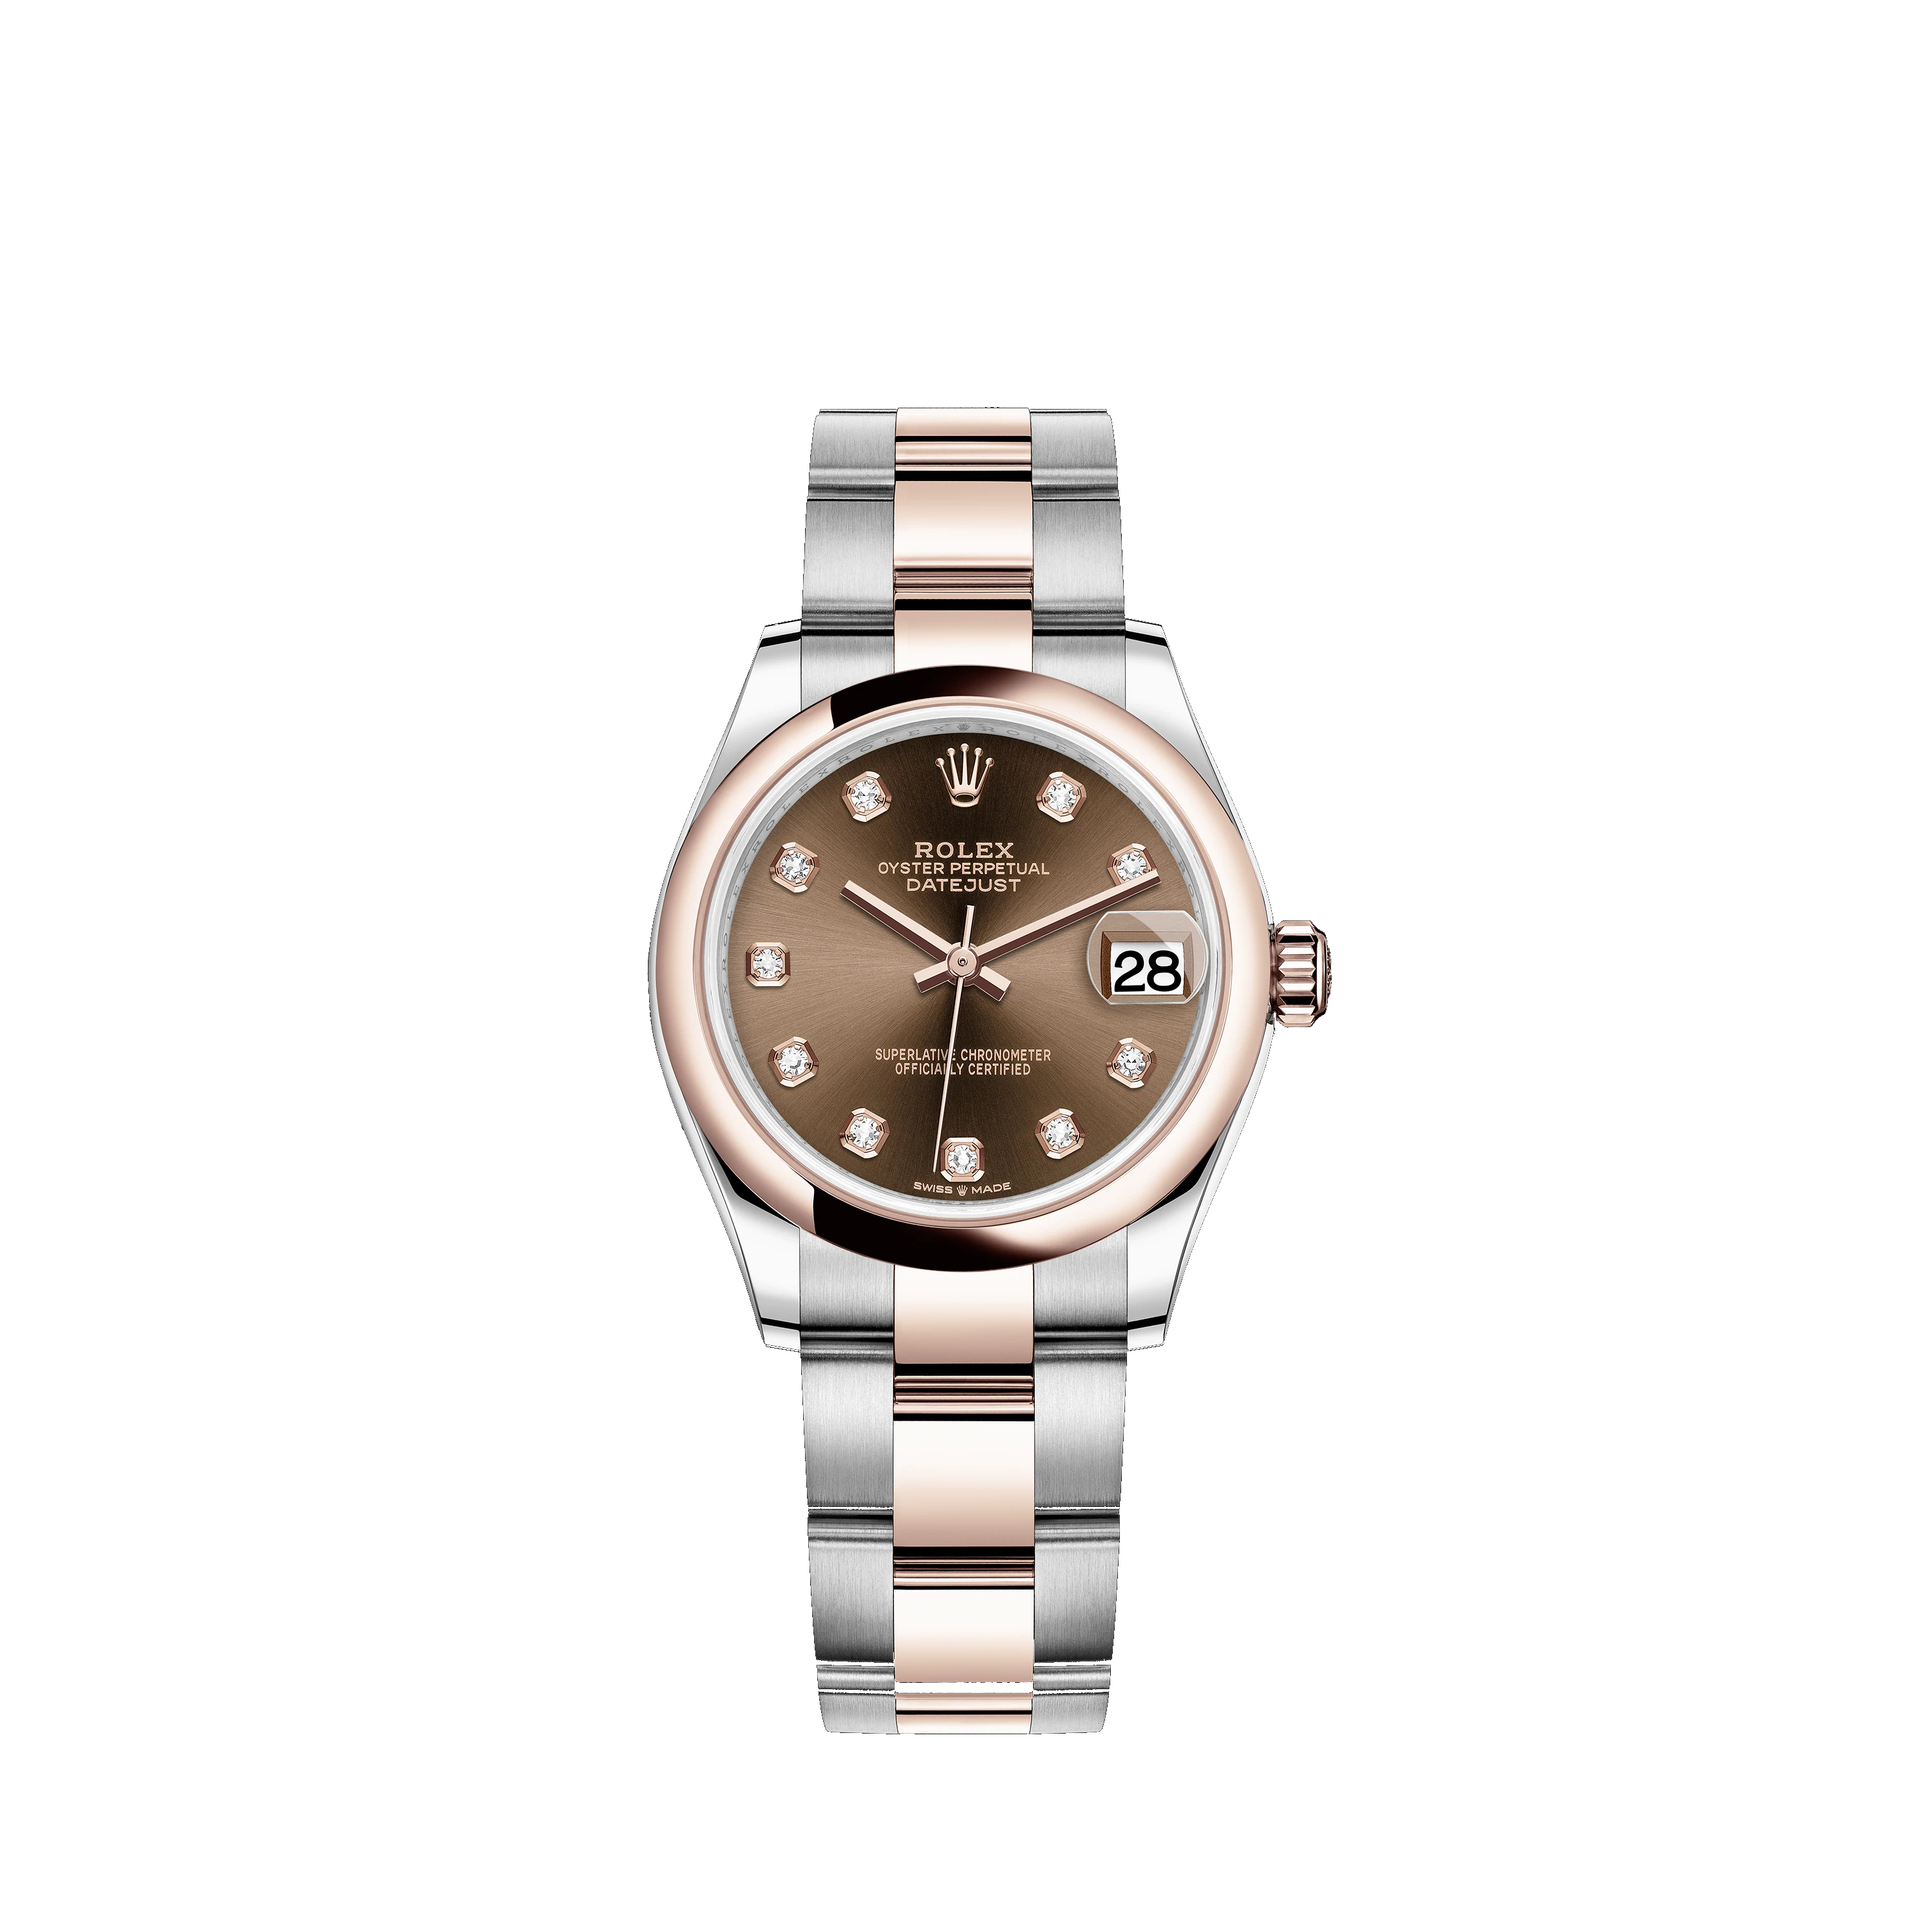 Datejust 31 278241 Rose Gold & Stainless Steel Watch (Chocolate Set with Diamonds)